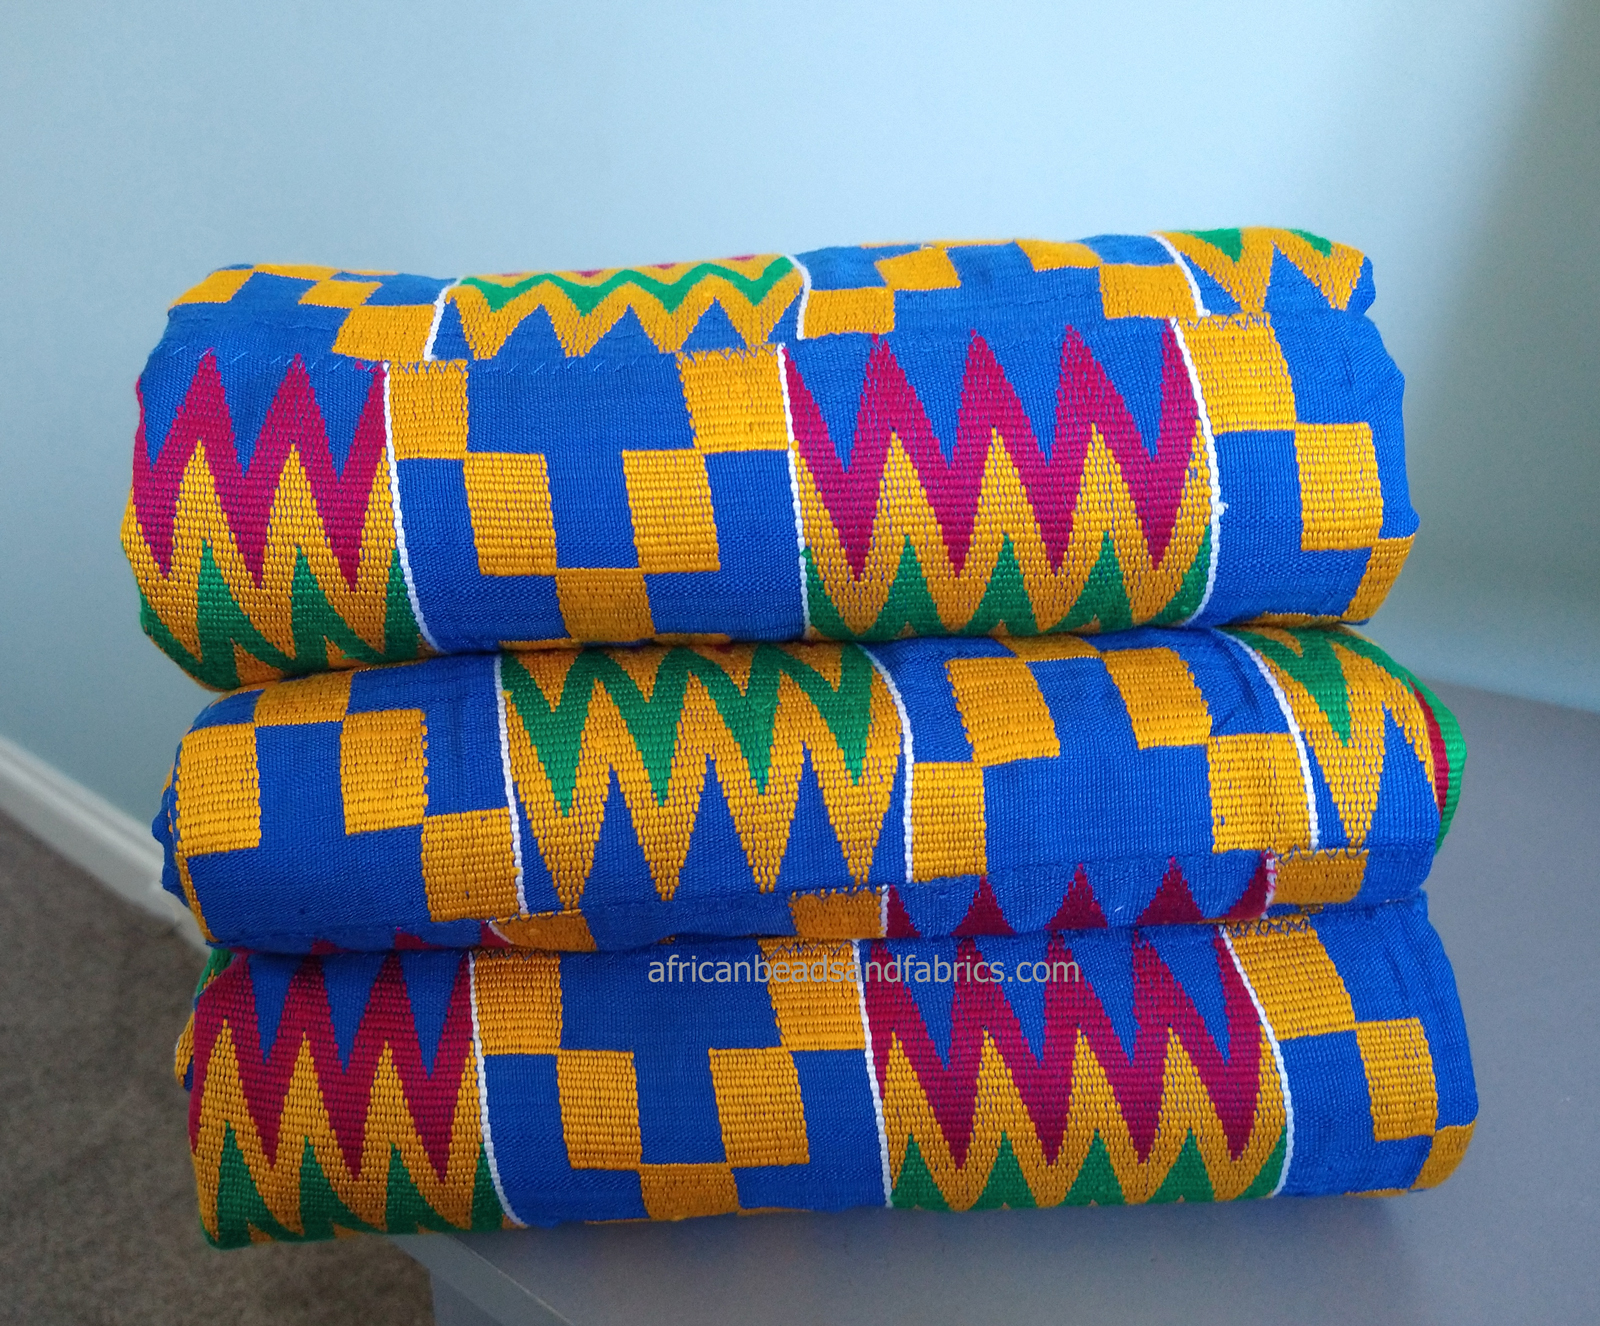 Kente Cloth African Fabric Authentic Ghanaian Handwoven Cloth, Blue Fathia  Fata Nkrumah Design, One Large Piece – African Beads & Fabrics